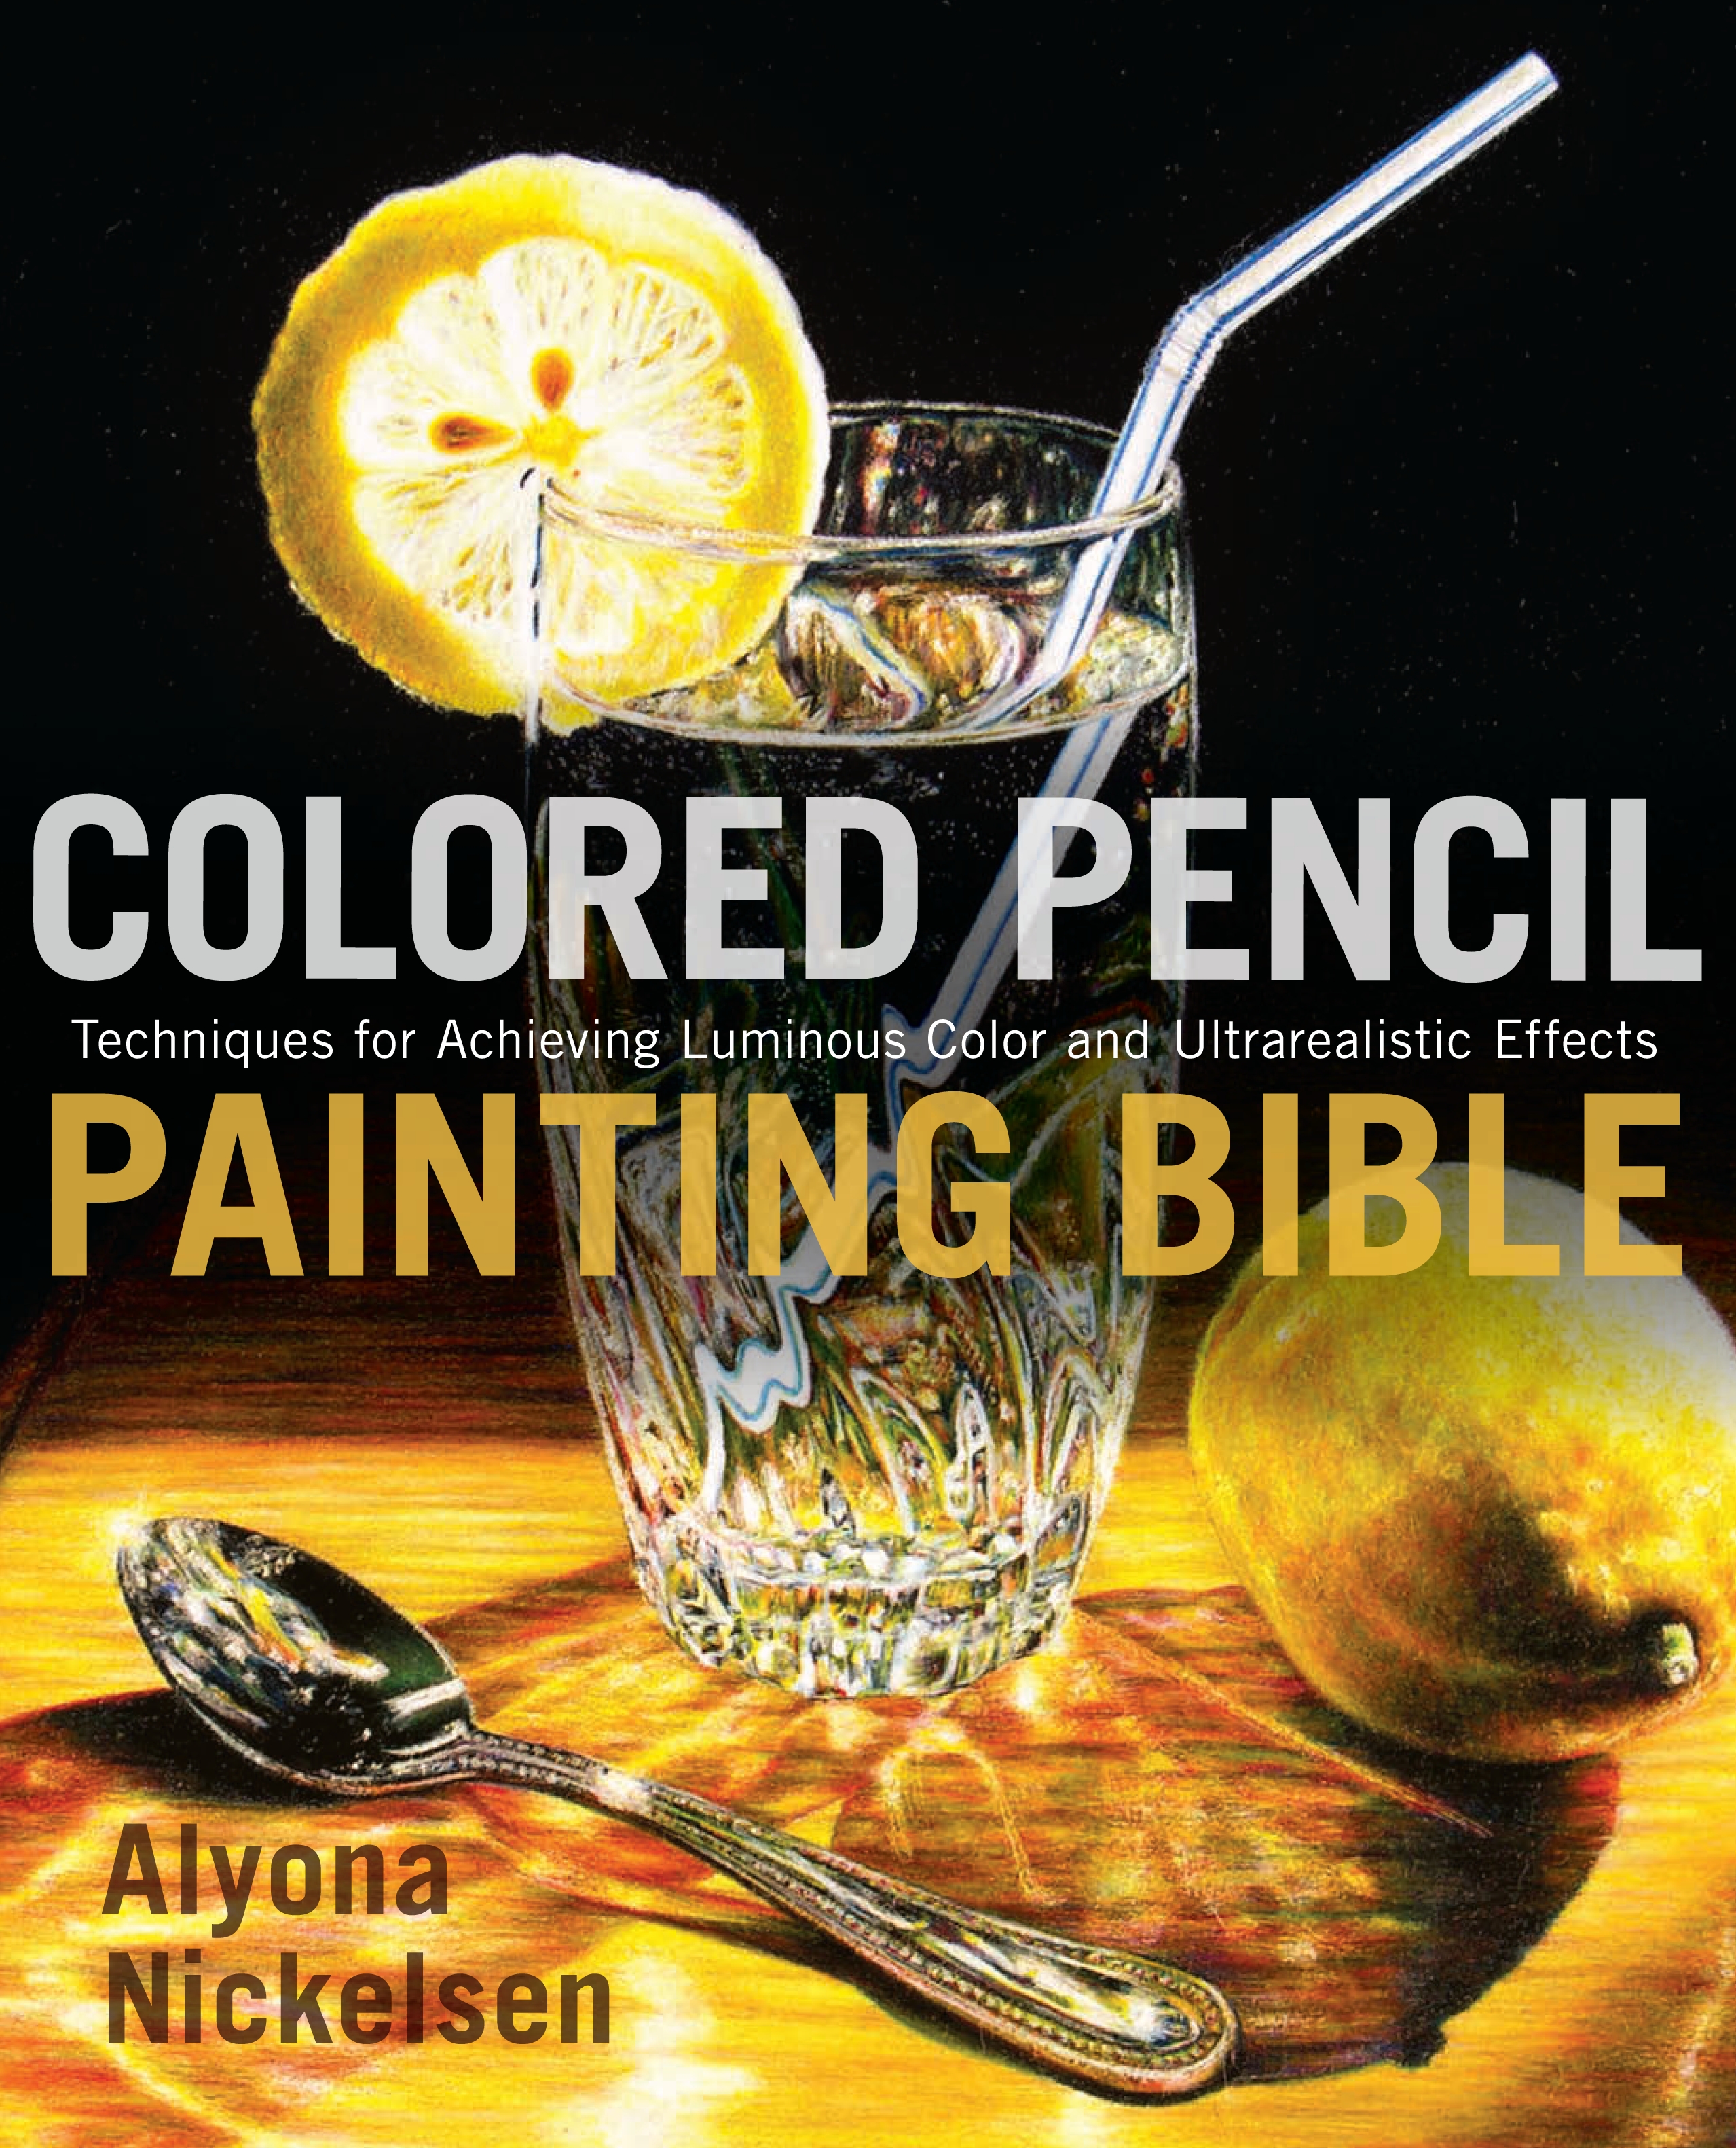 Colored Pencil Painting Bible By Alyona Nickelsen Penguin Books Australia